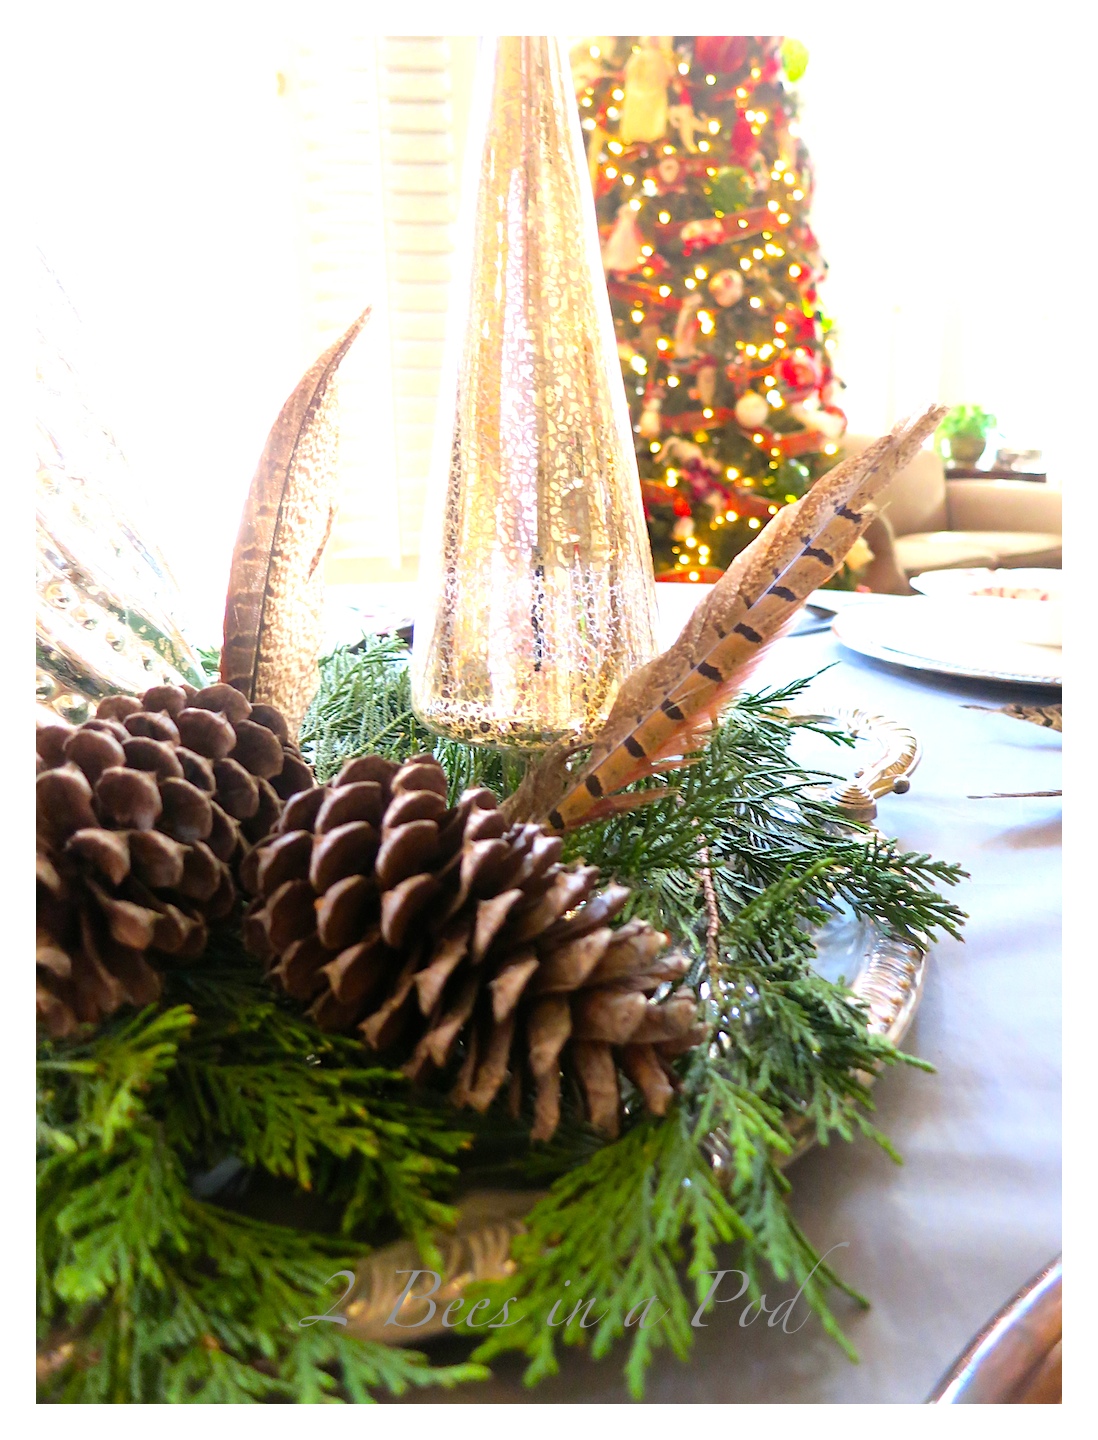 Casual Christmas Tablescape - using vintage silver, vintage red and white transfer ware, gray and red. Fresh cut greenery and mercury glass trees create a lovely centerpiece.